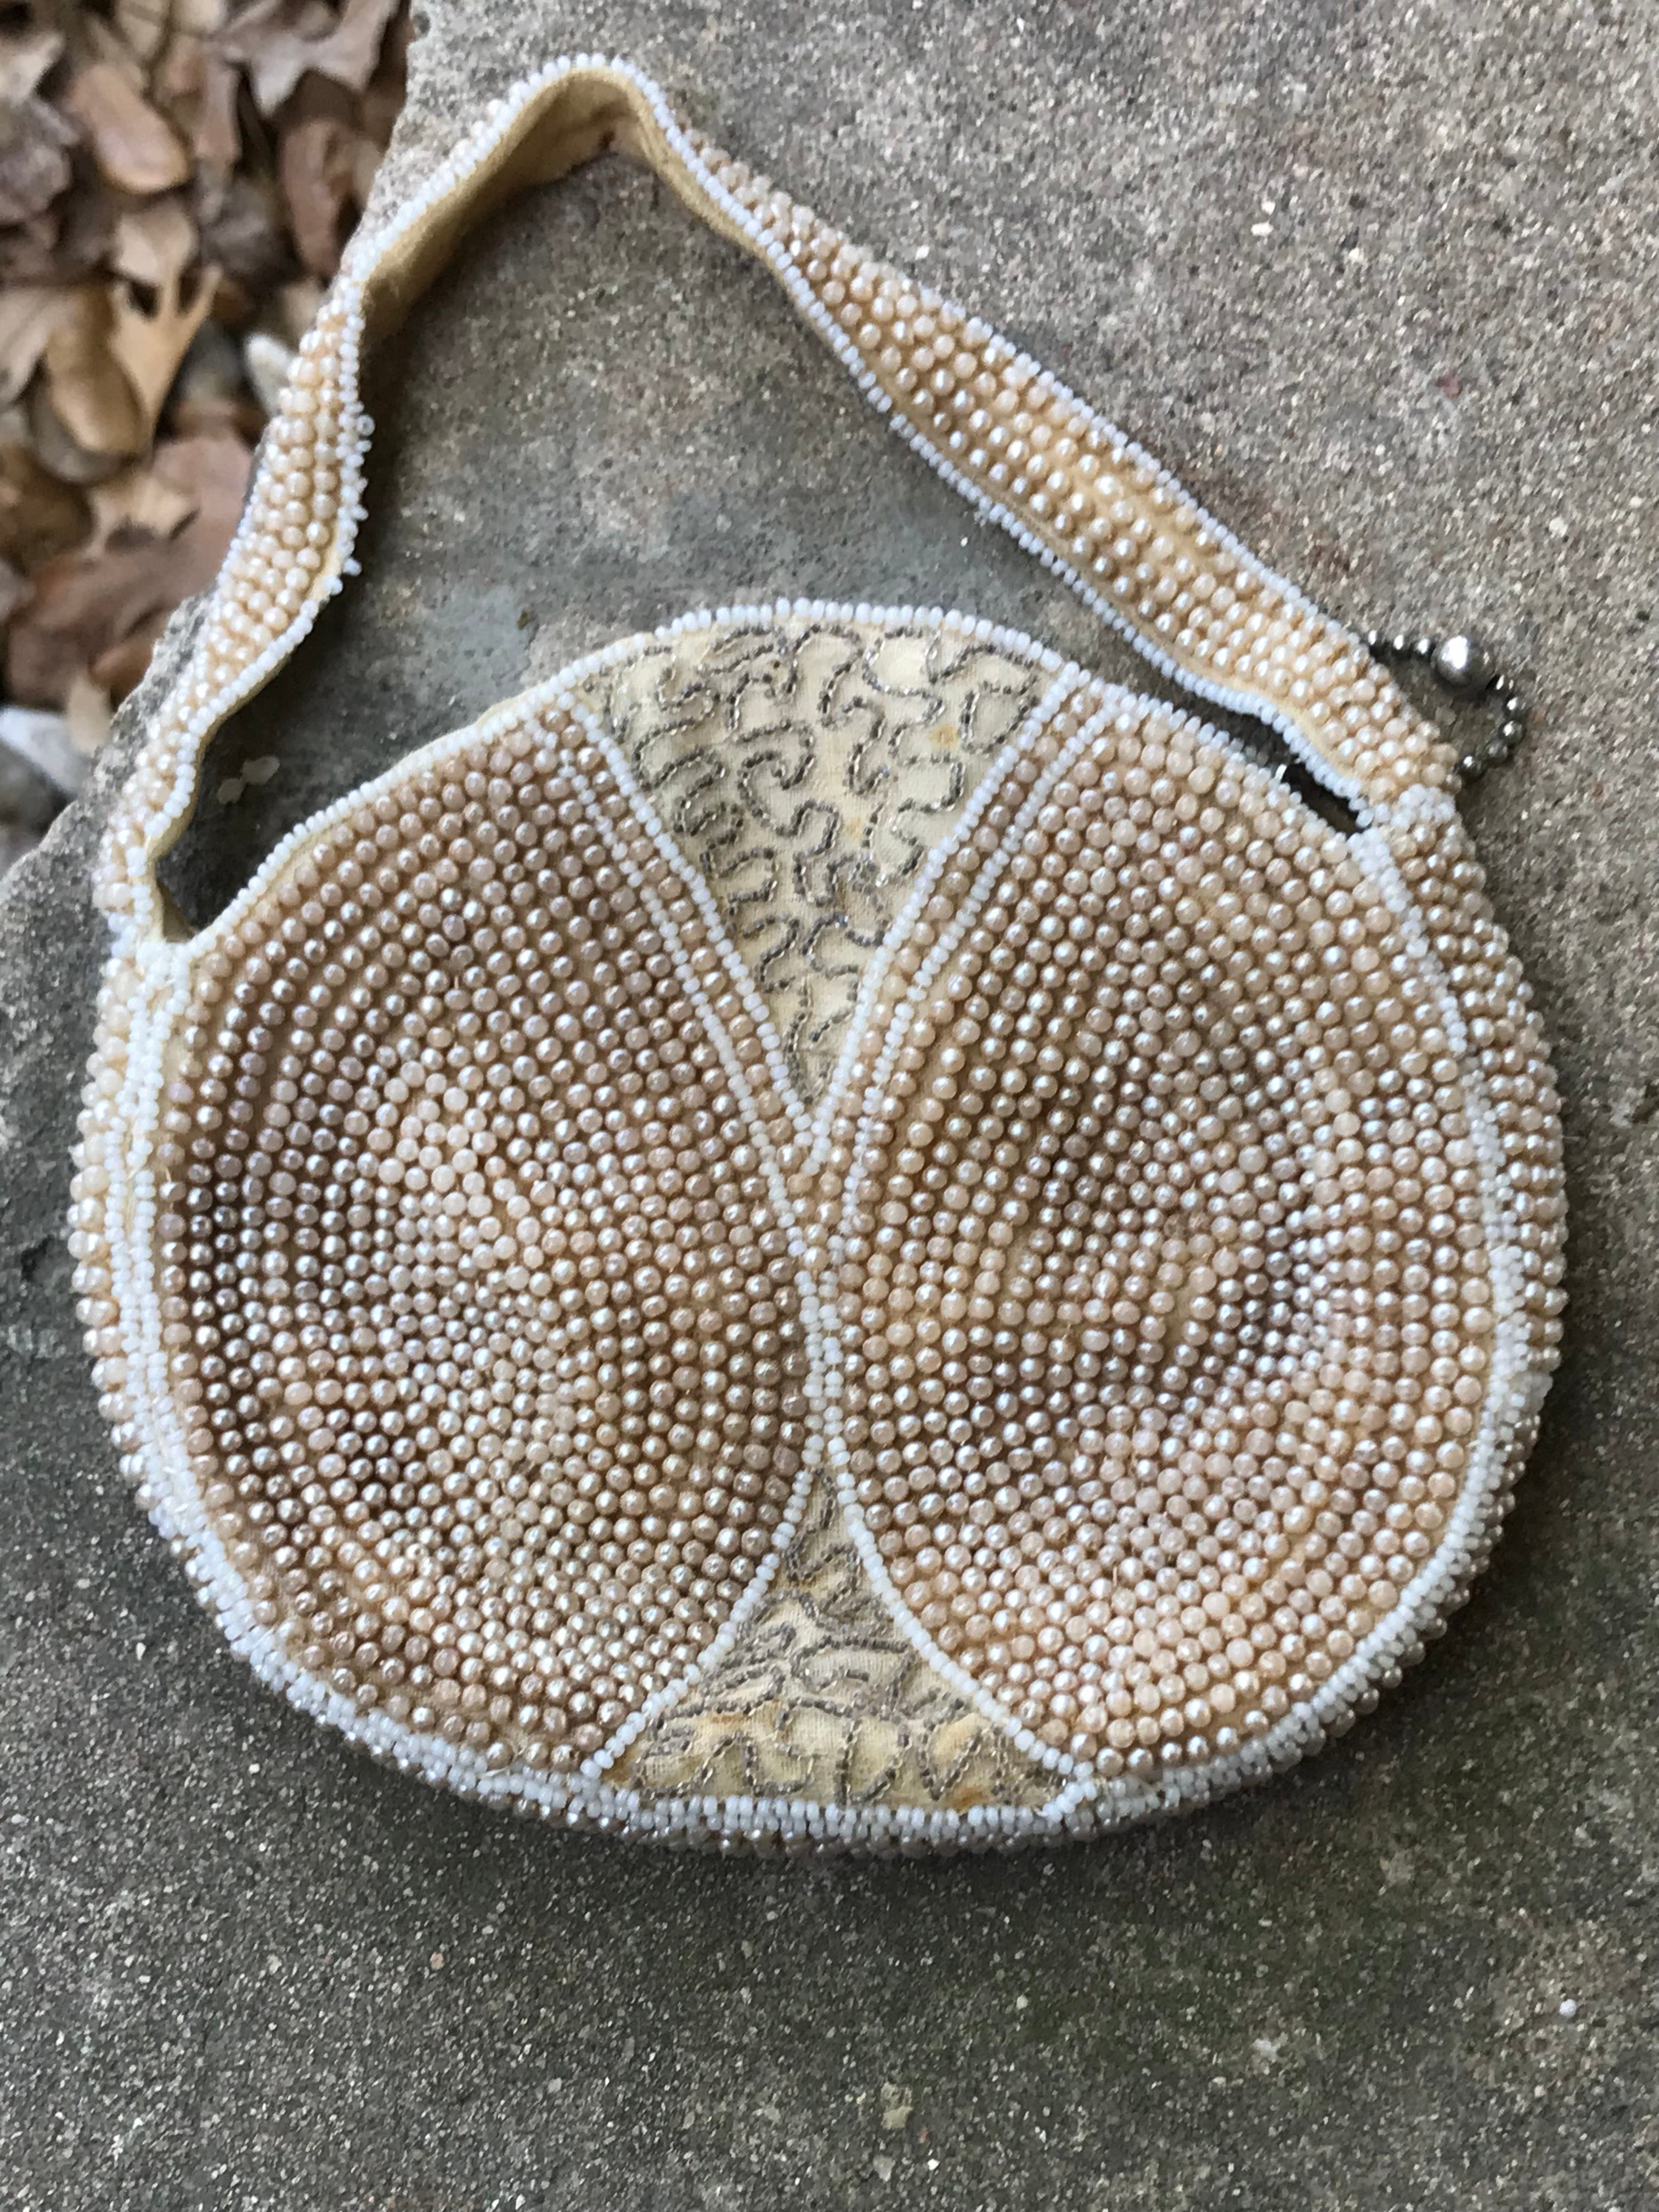 Vintage Beaded White Clutch Purse